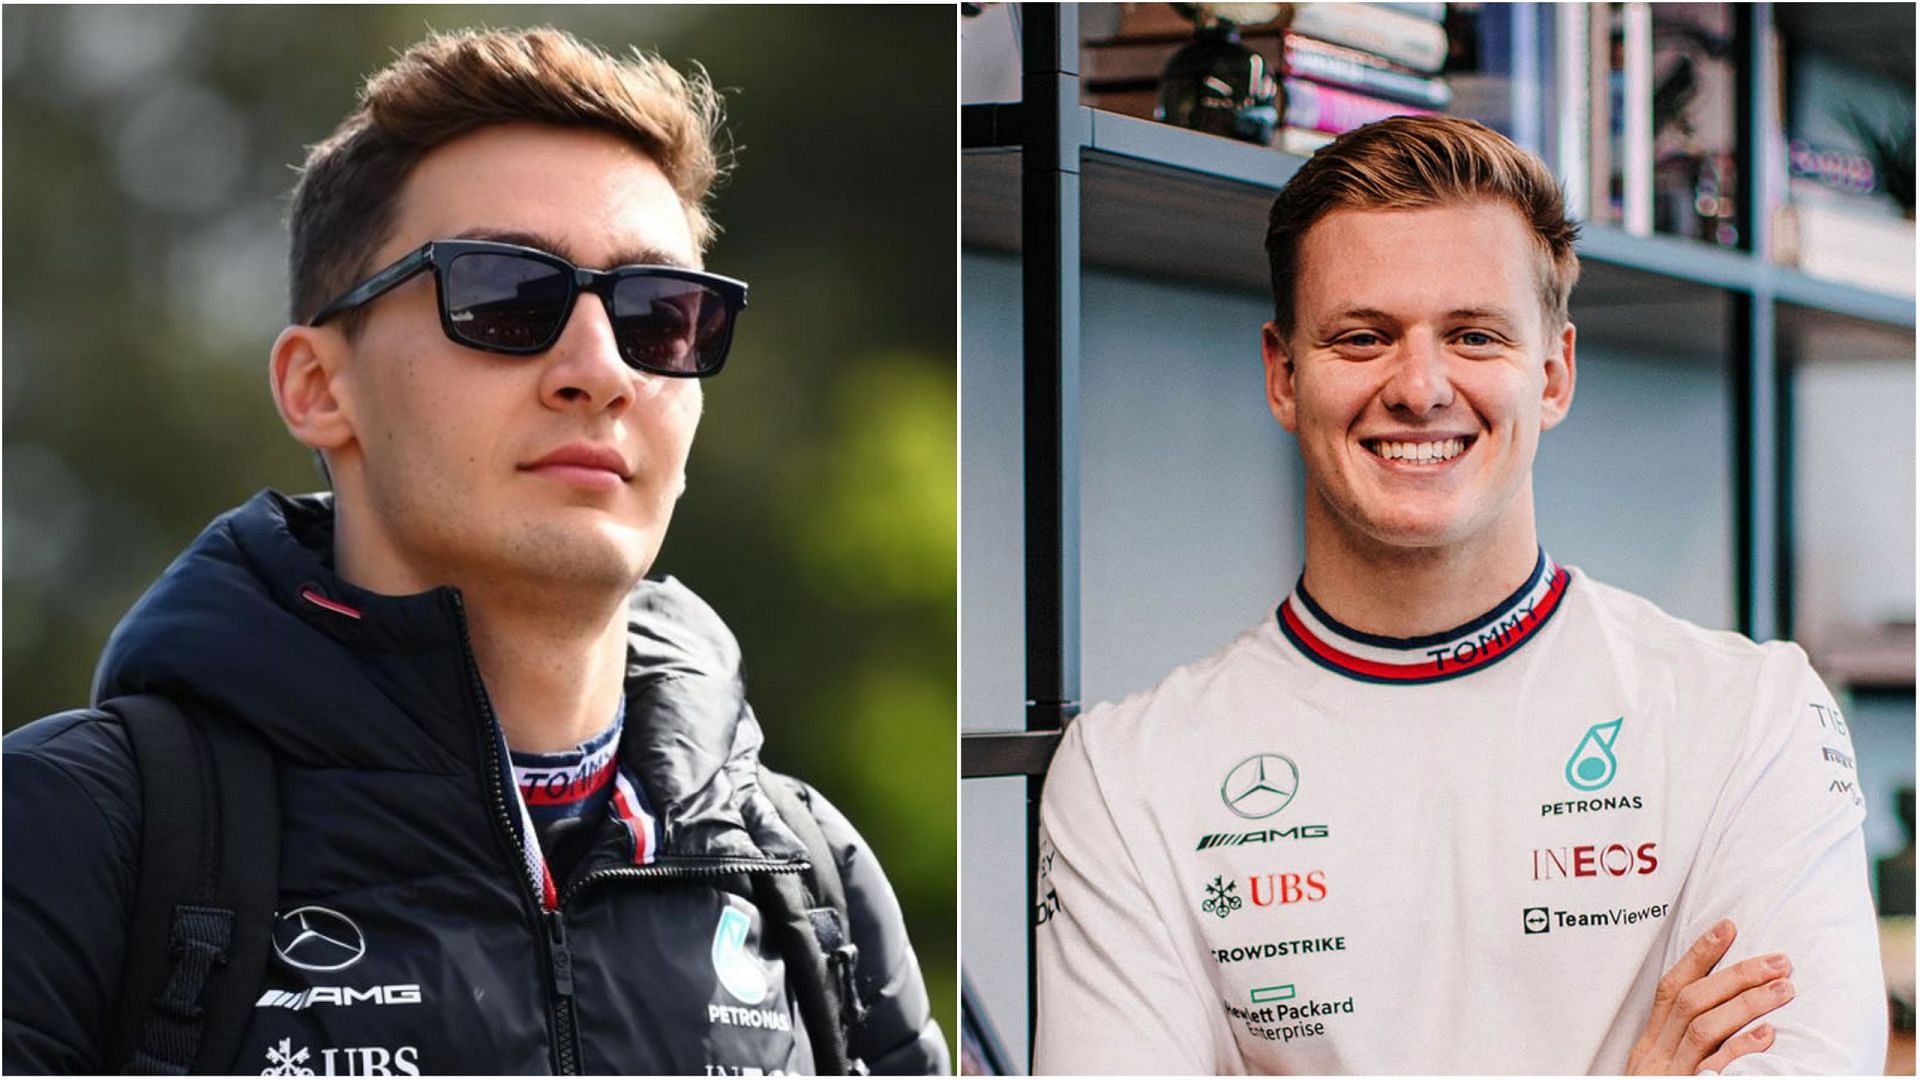 George Russell (L) knows what Mick Schumacher (R) needs to get back into an F1 car